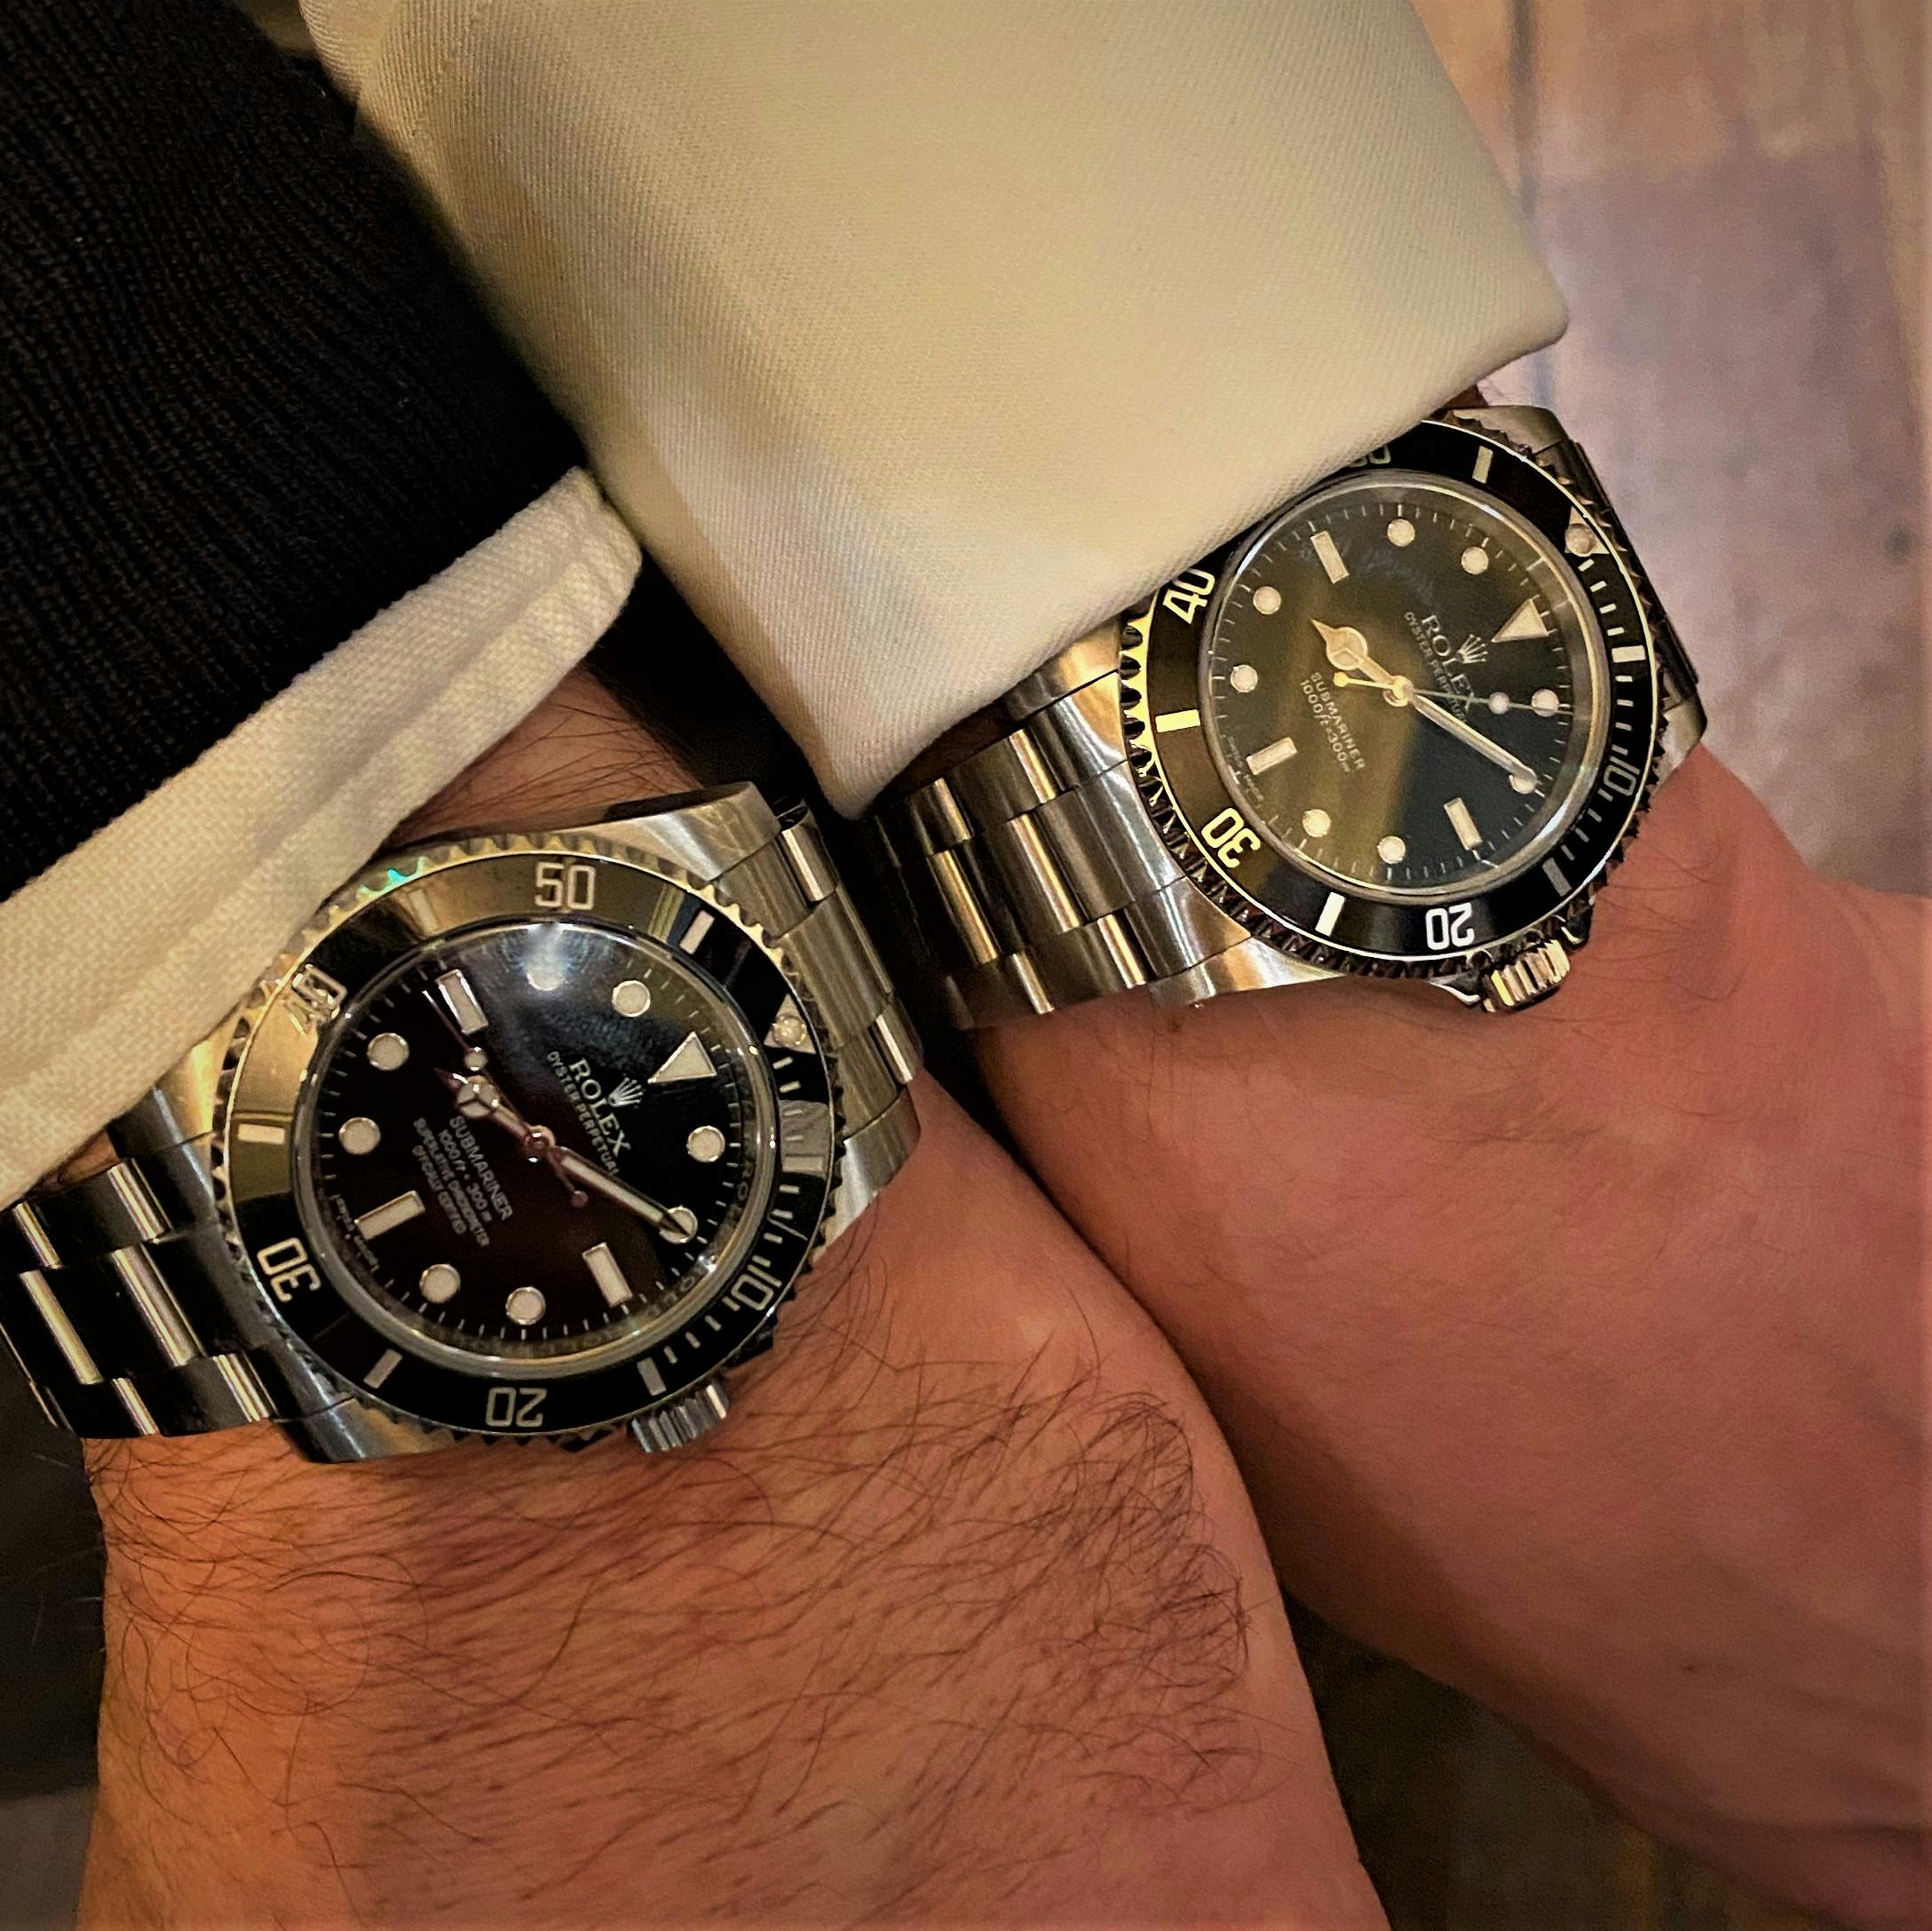 Two of the many watches present at the October 2021 Meetup Event